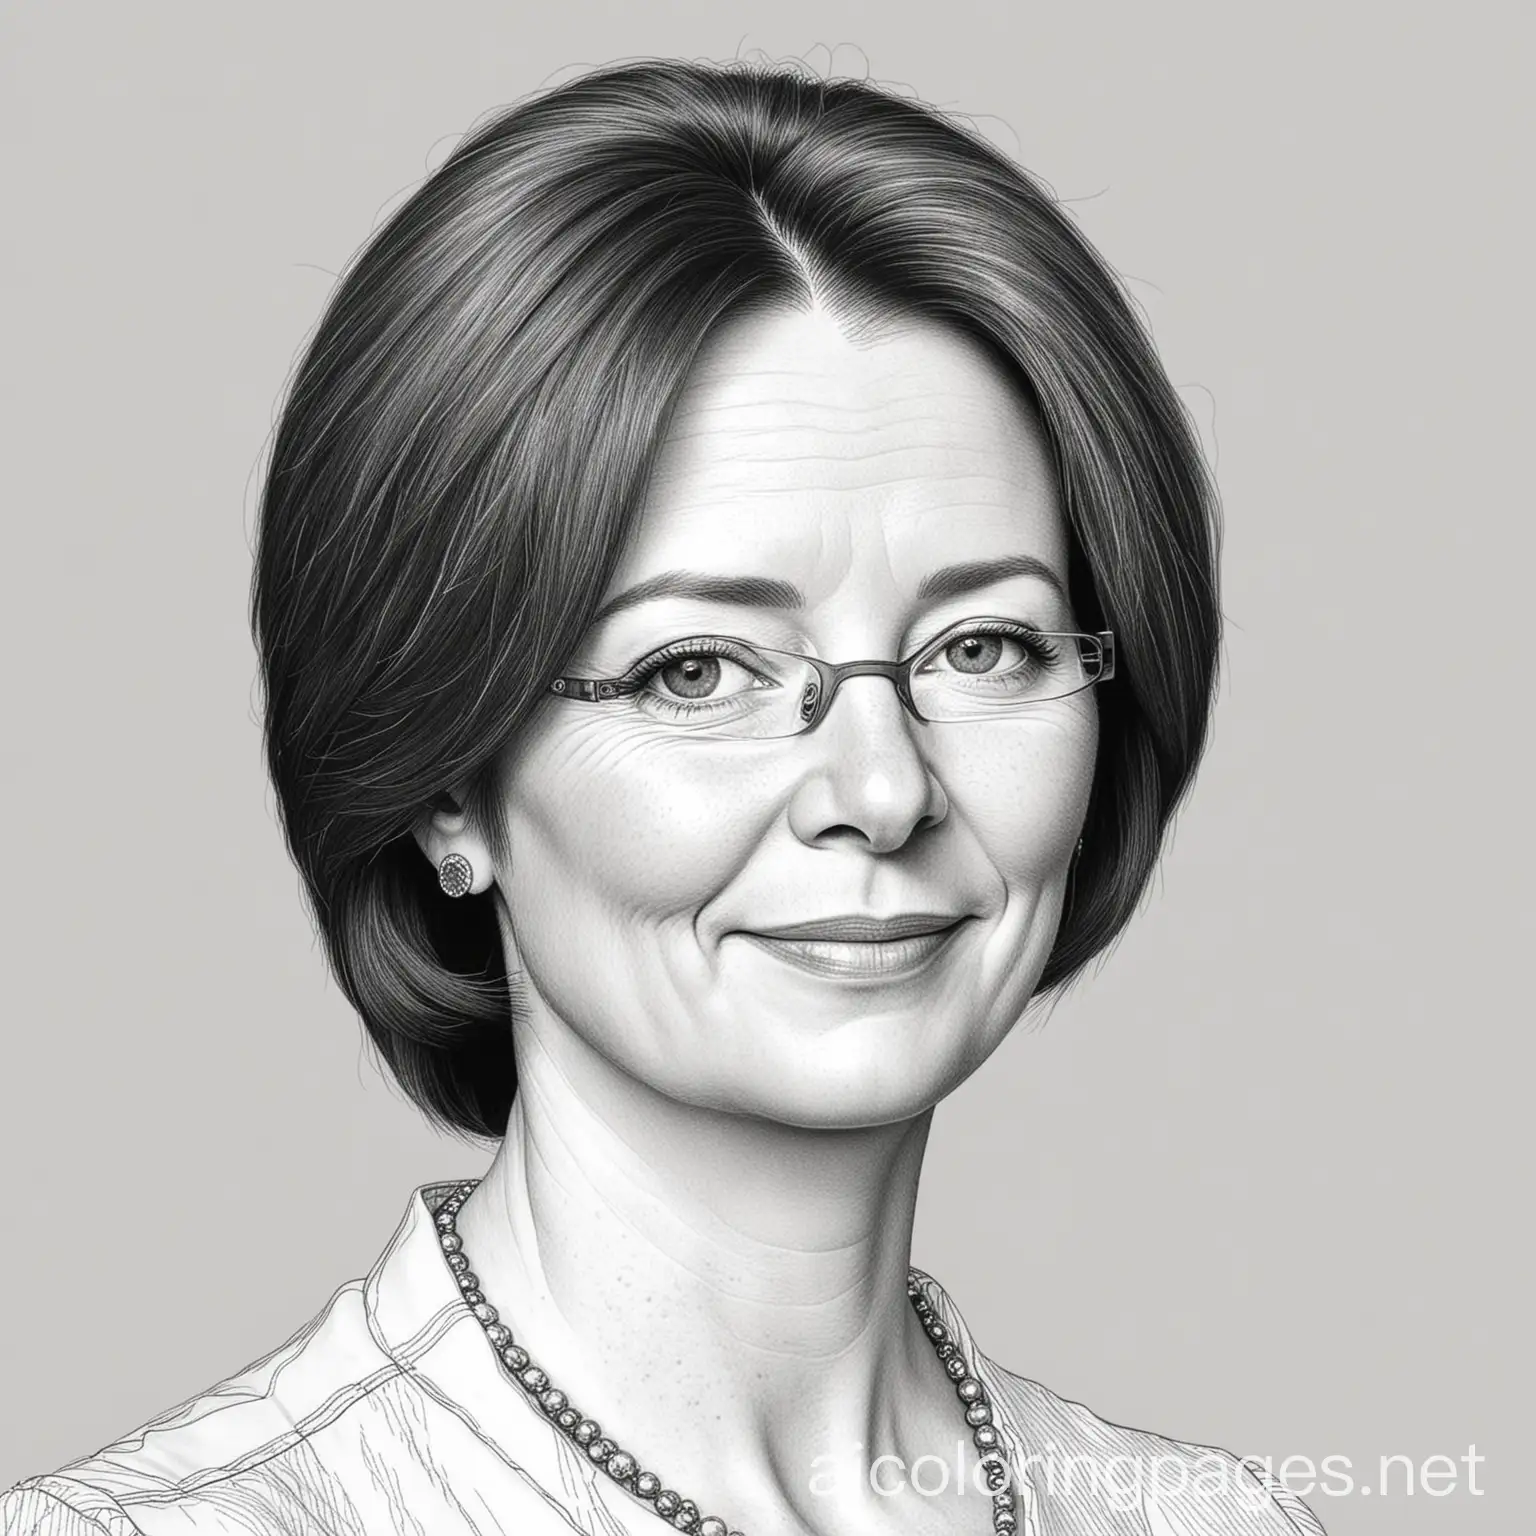 Julia-Gillard-Portrait-Coloring-Page-Simplicity-in-Line-Art-on-White-Background